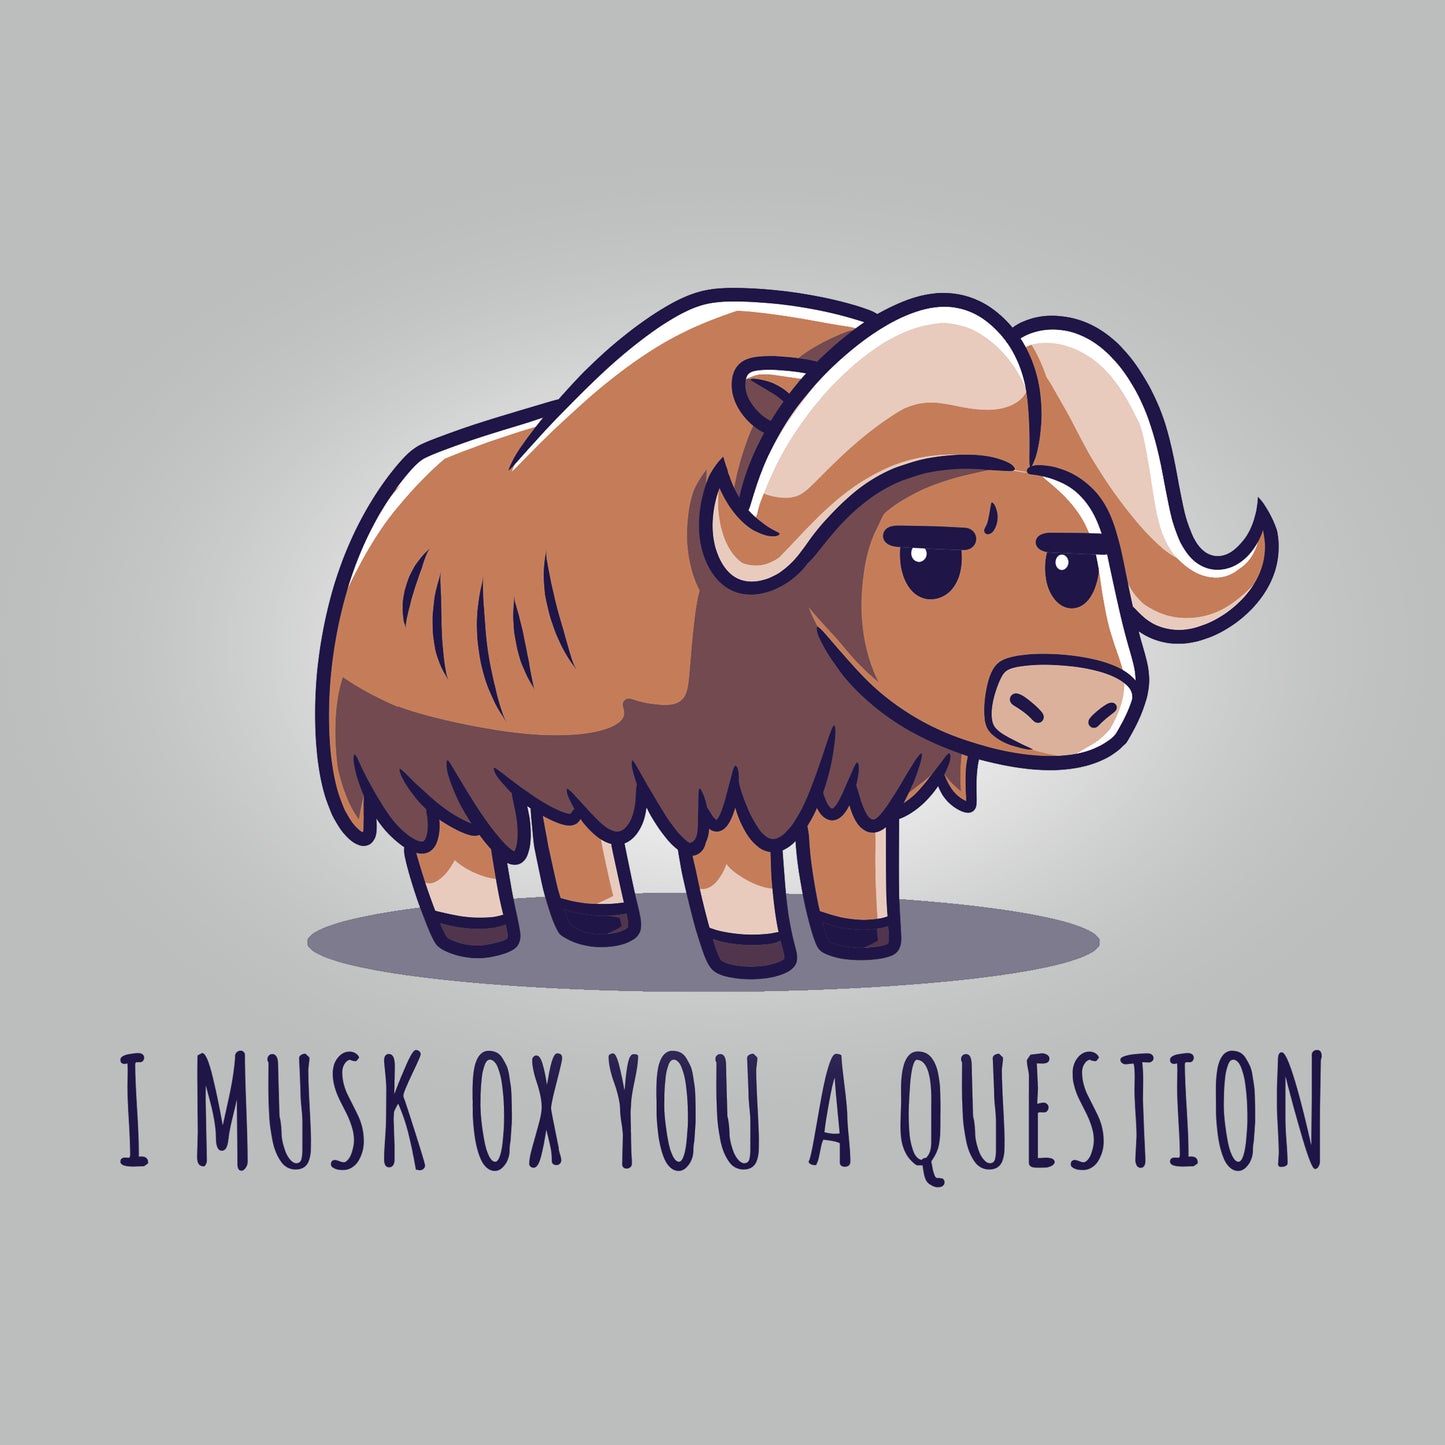 Illustration of a cartoon musk ox on a super soft ringspun cotton unisex tee with the pun "Musk Ox You a Question" beneath it by monsterdigital.